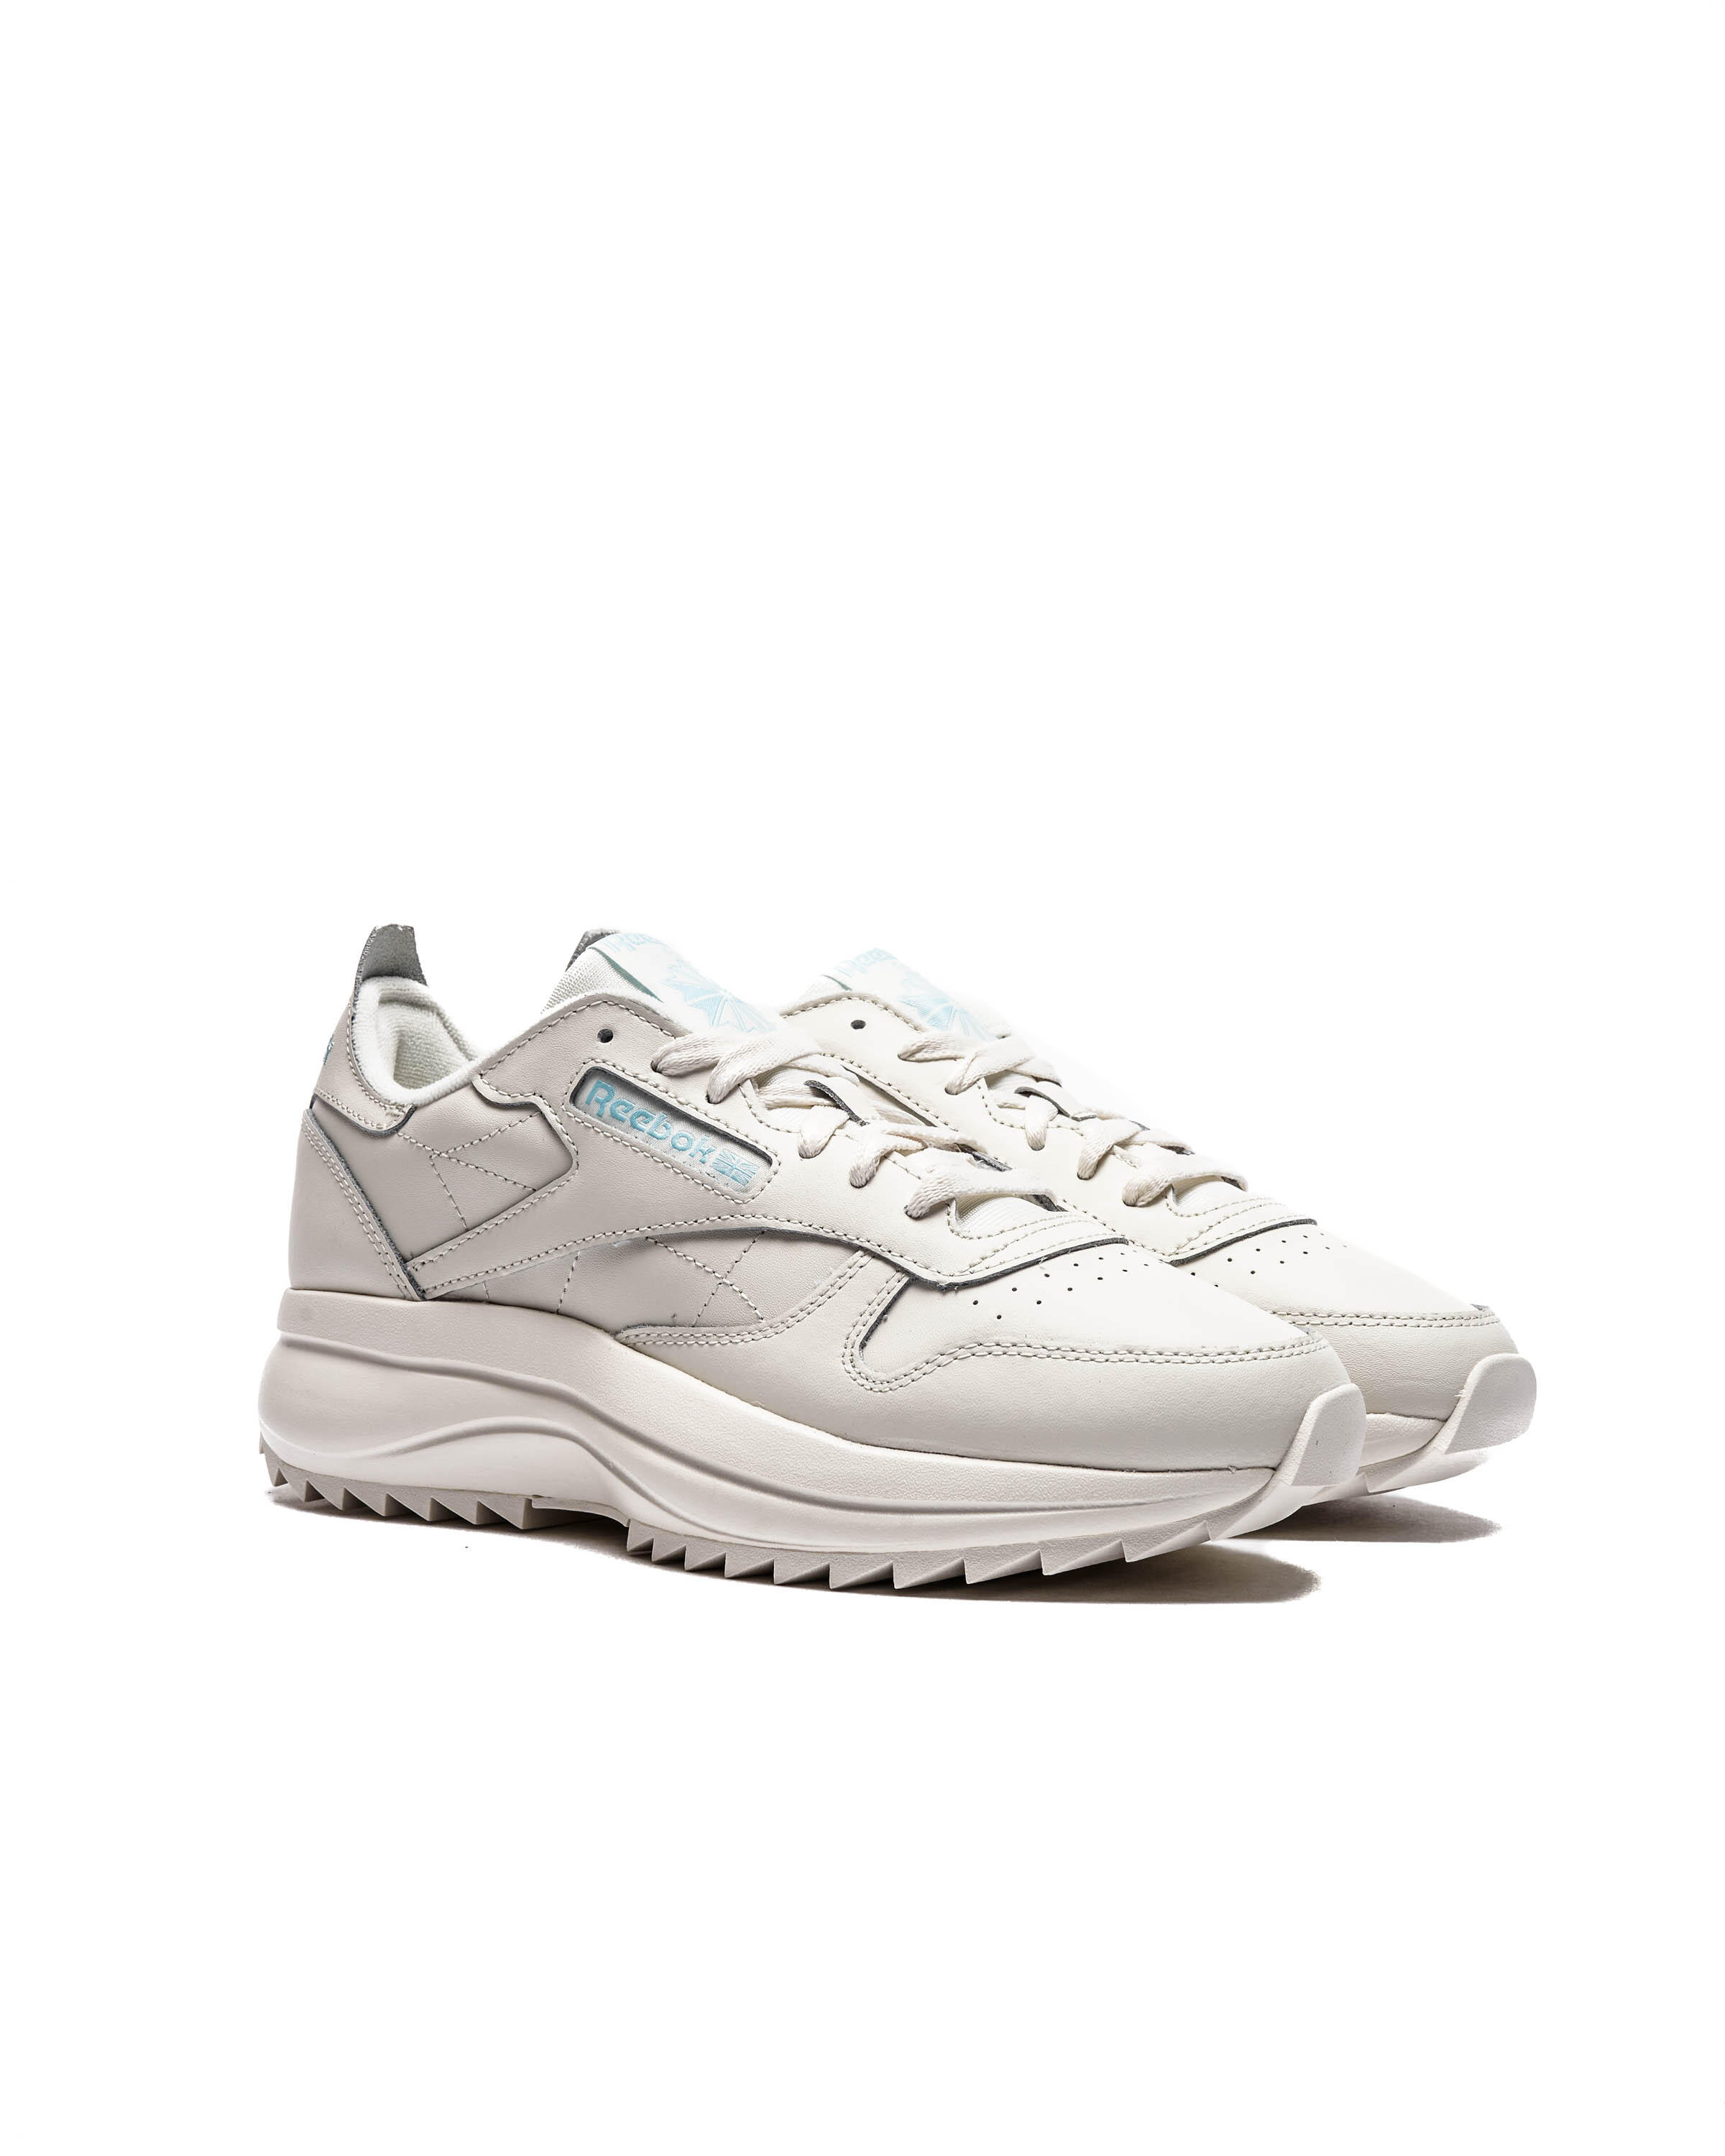 Reebok WMNS CLASSIC LEATHER SP